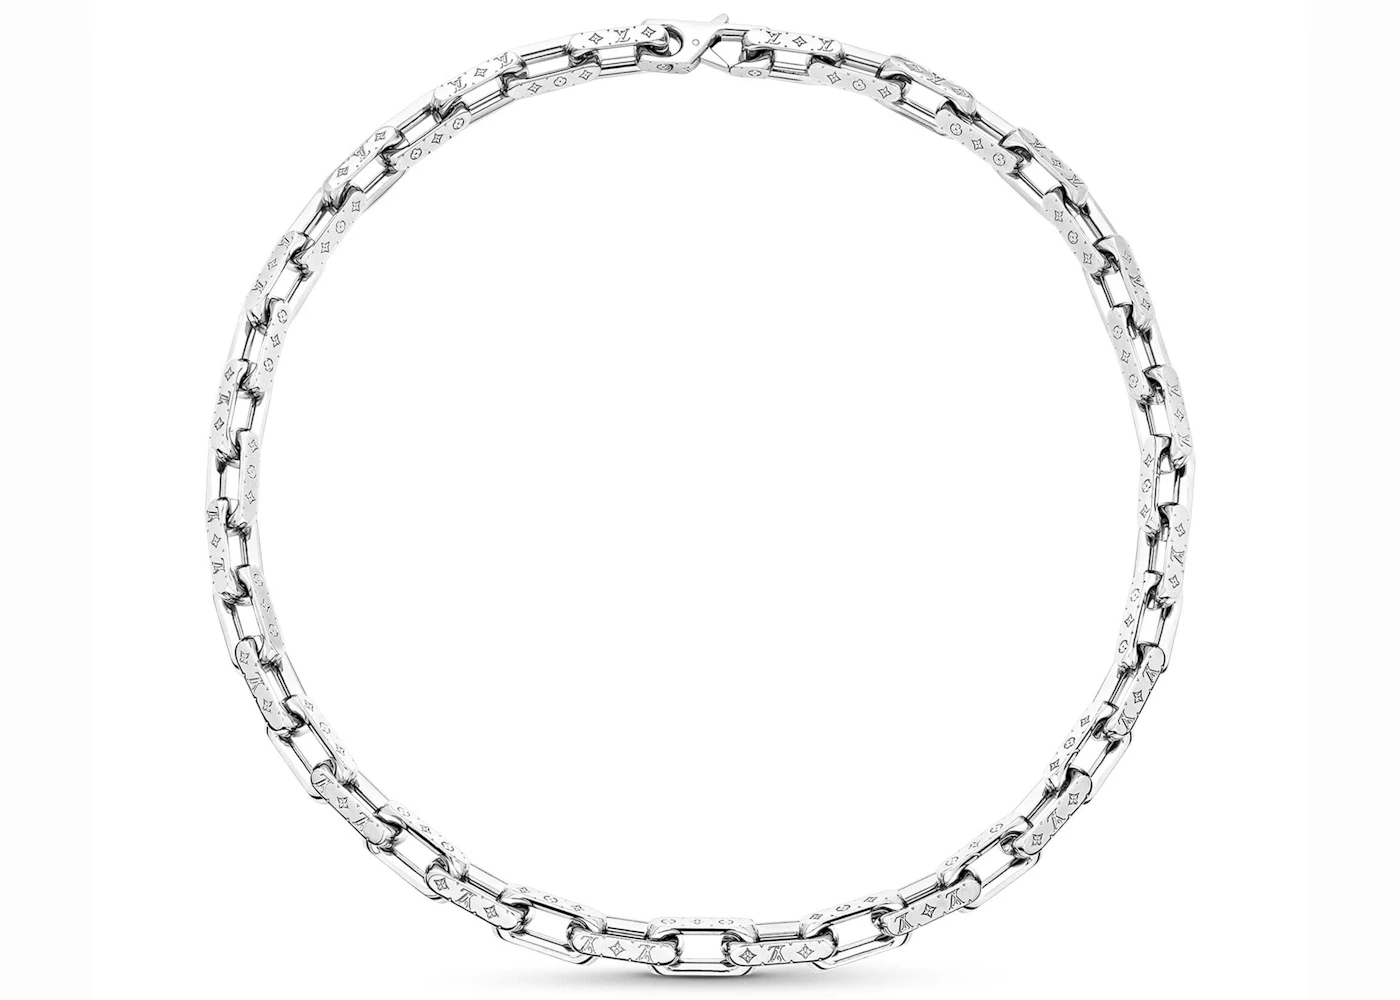 Louis Monogram Chain Necklace Silver in Metal Silver-tone - US